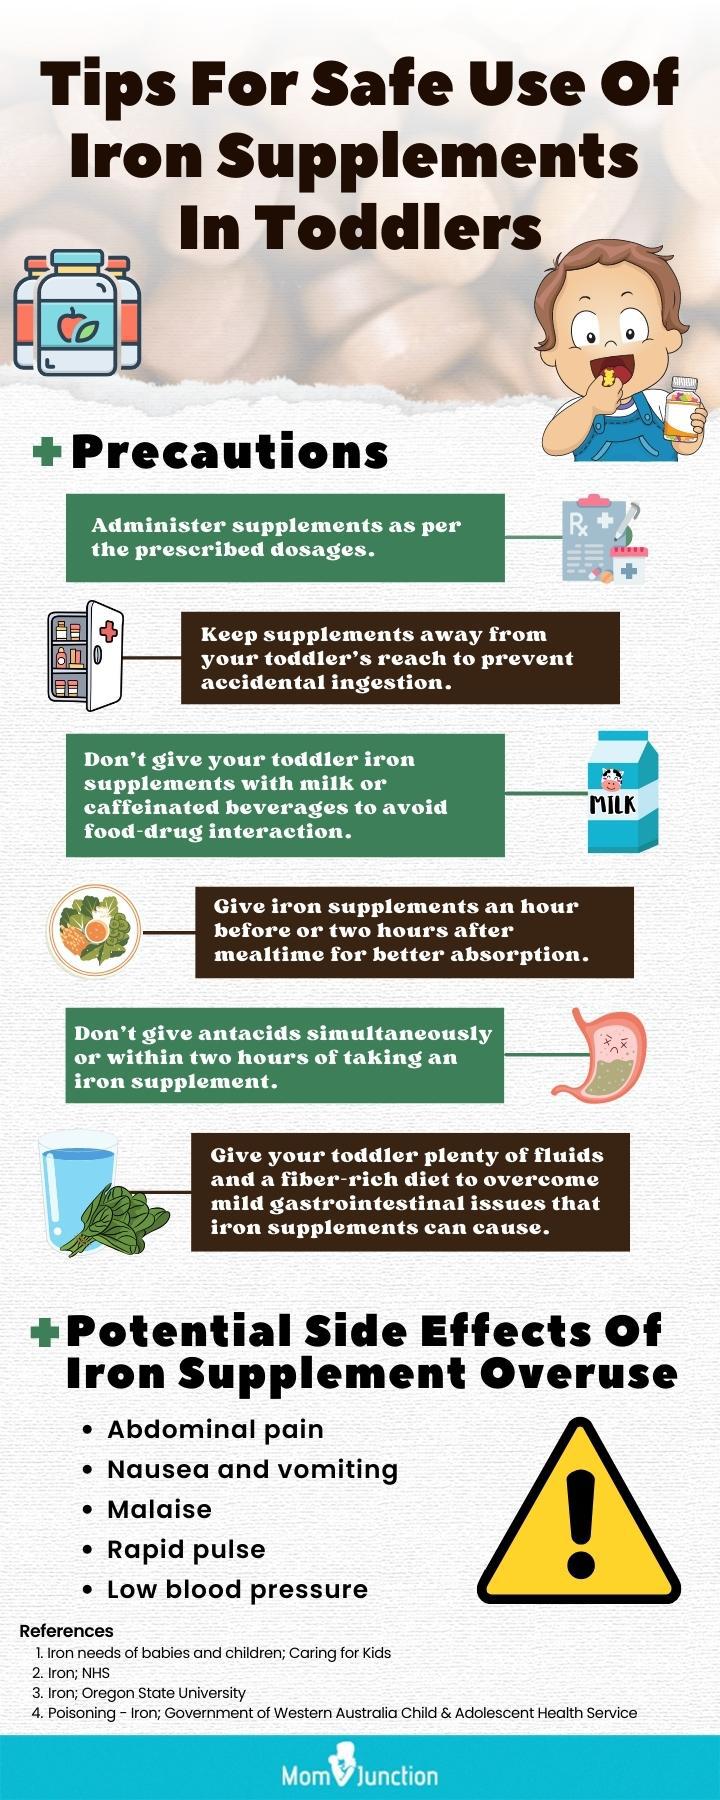 tips for safe use for iron supplements in toddlers (infographic)